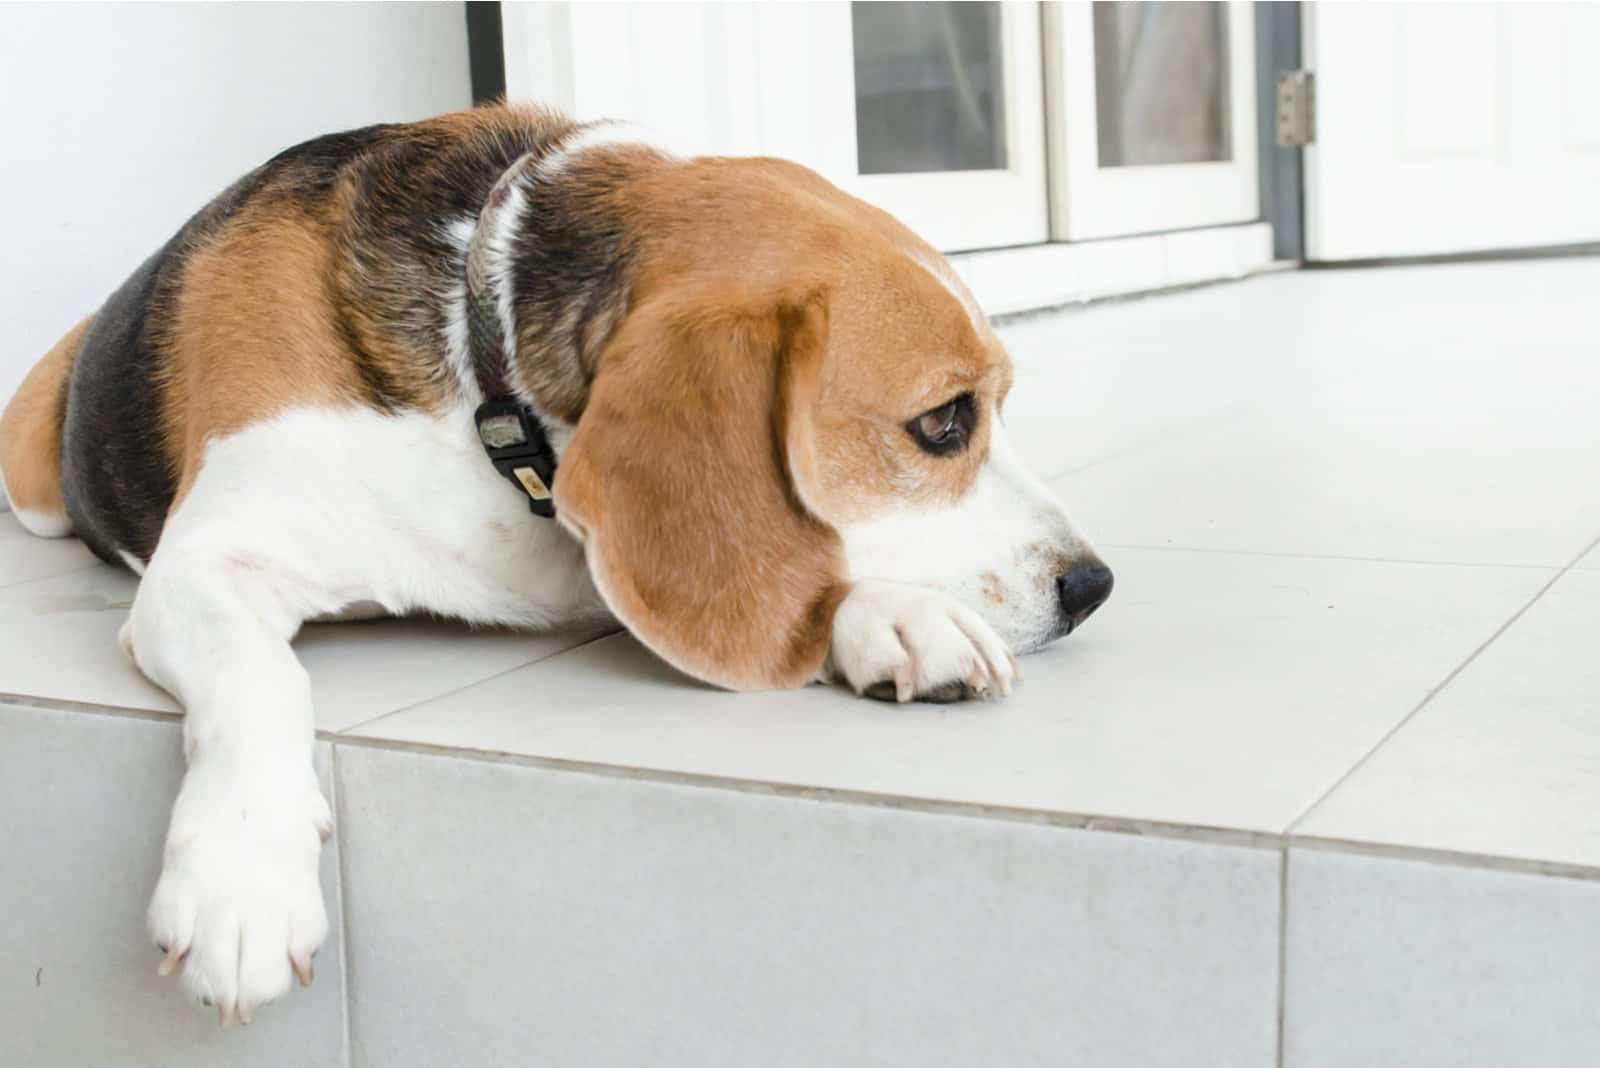 Beagle lies down and watches sadly